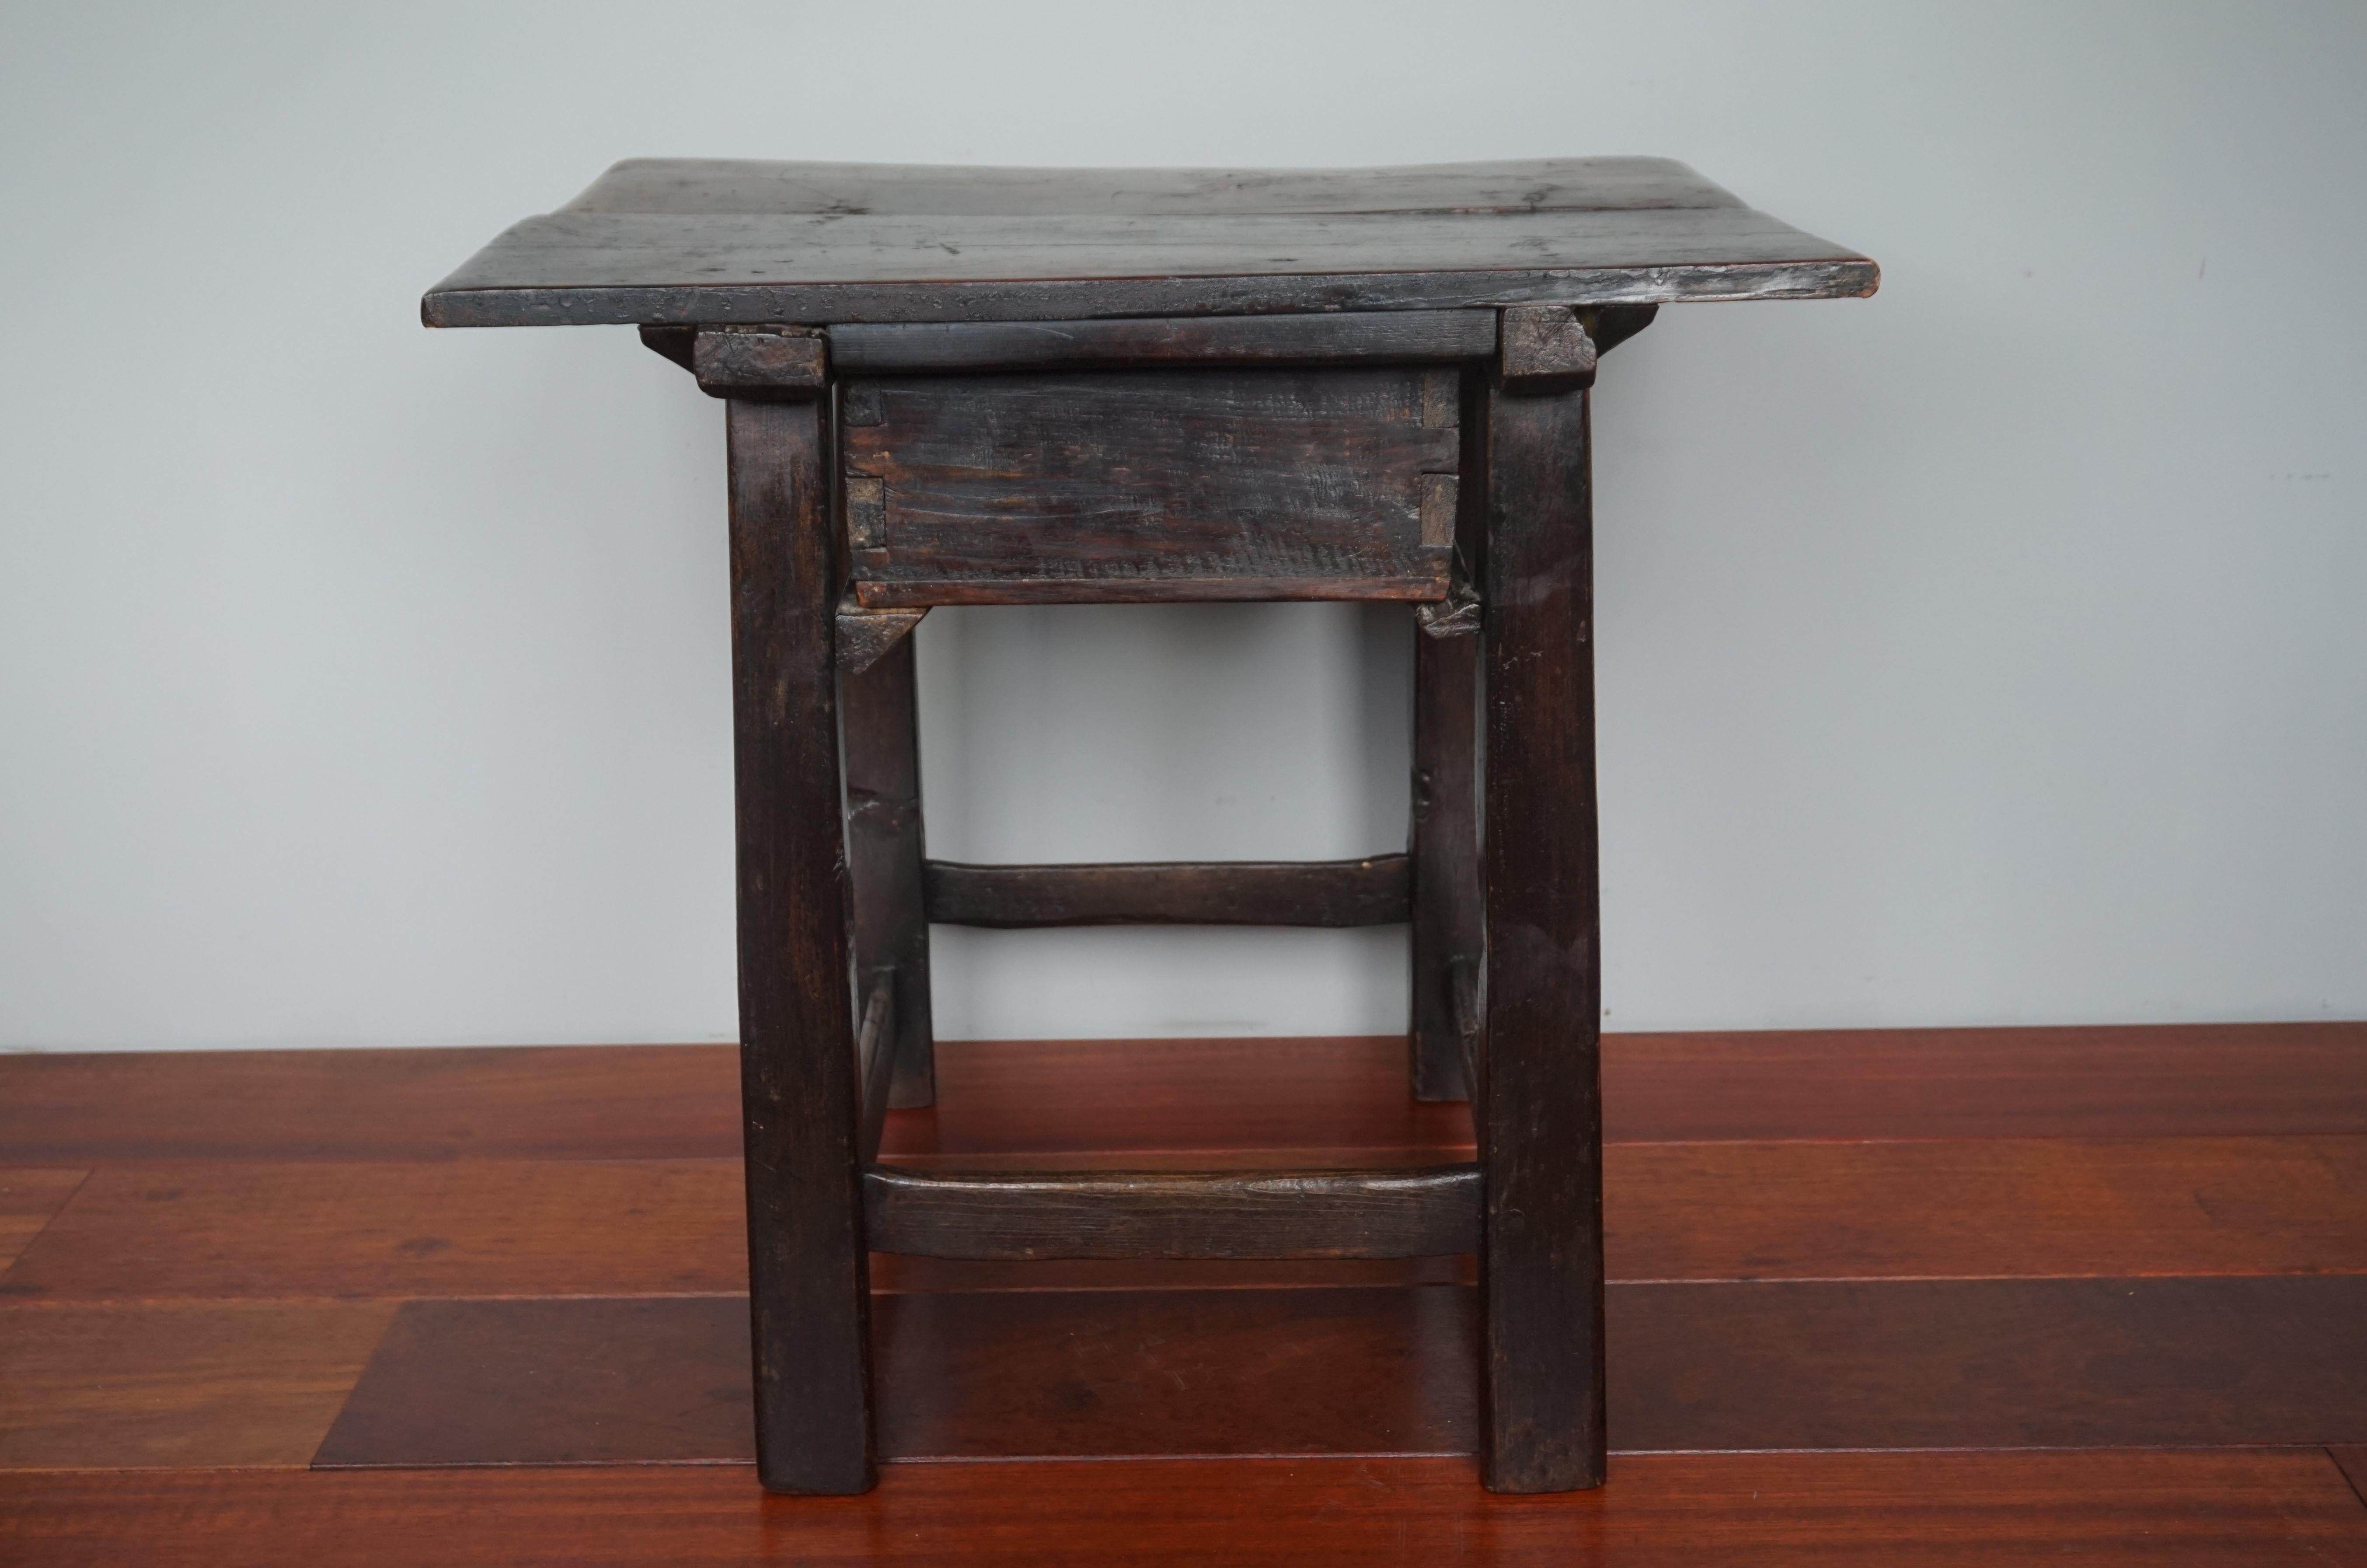 Antique and Rustic Early 1700s Wooden Spanish Countryside Pay Table with Drawer 10